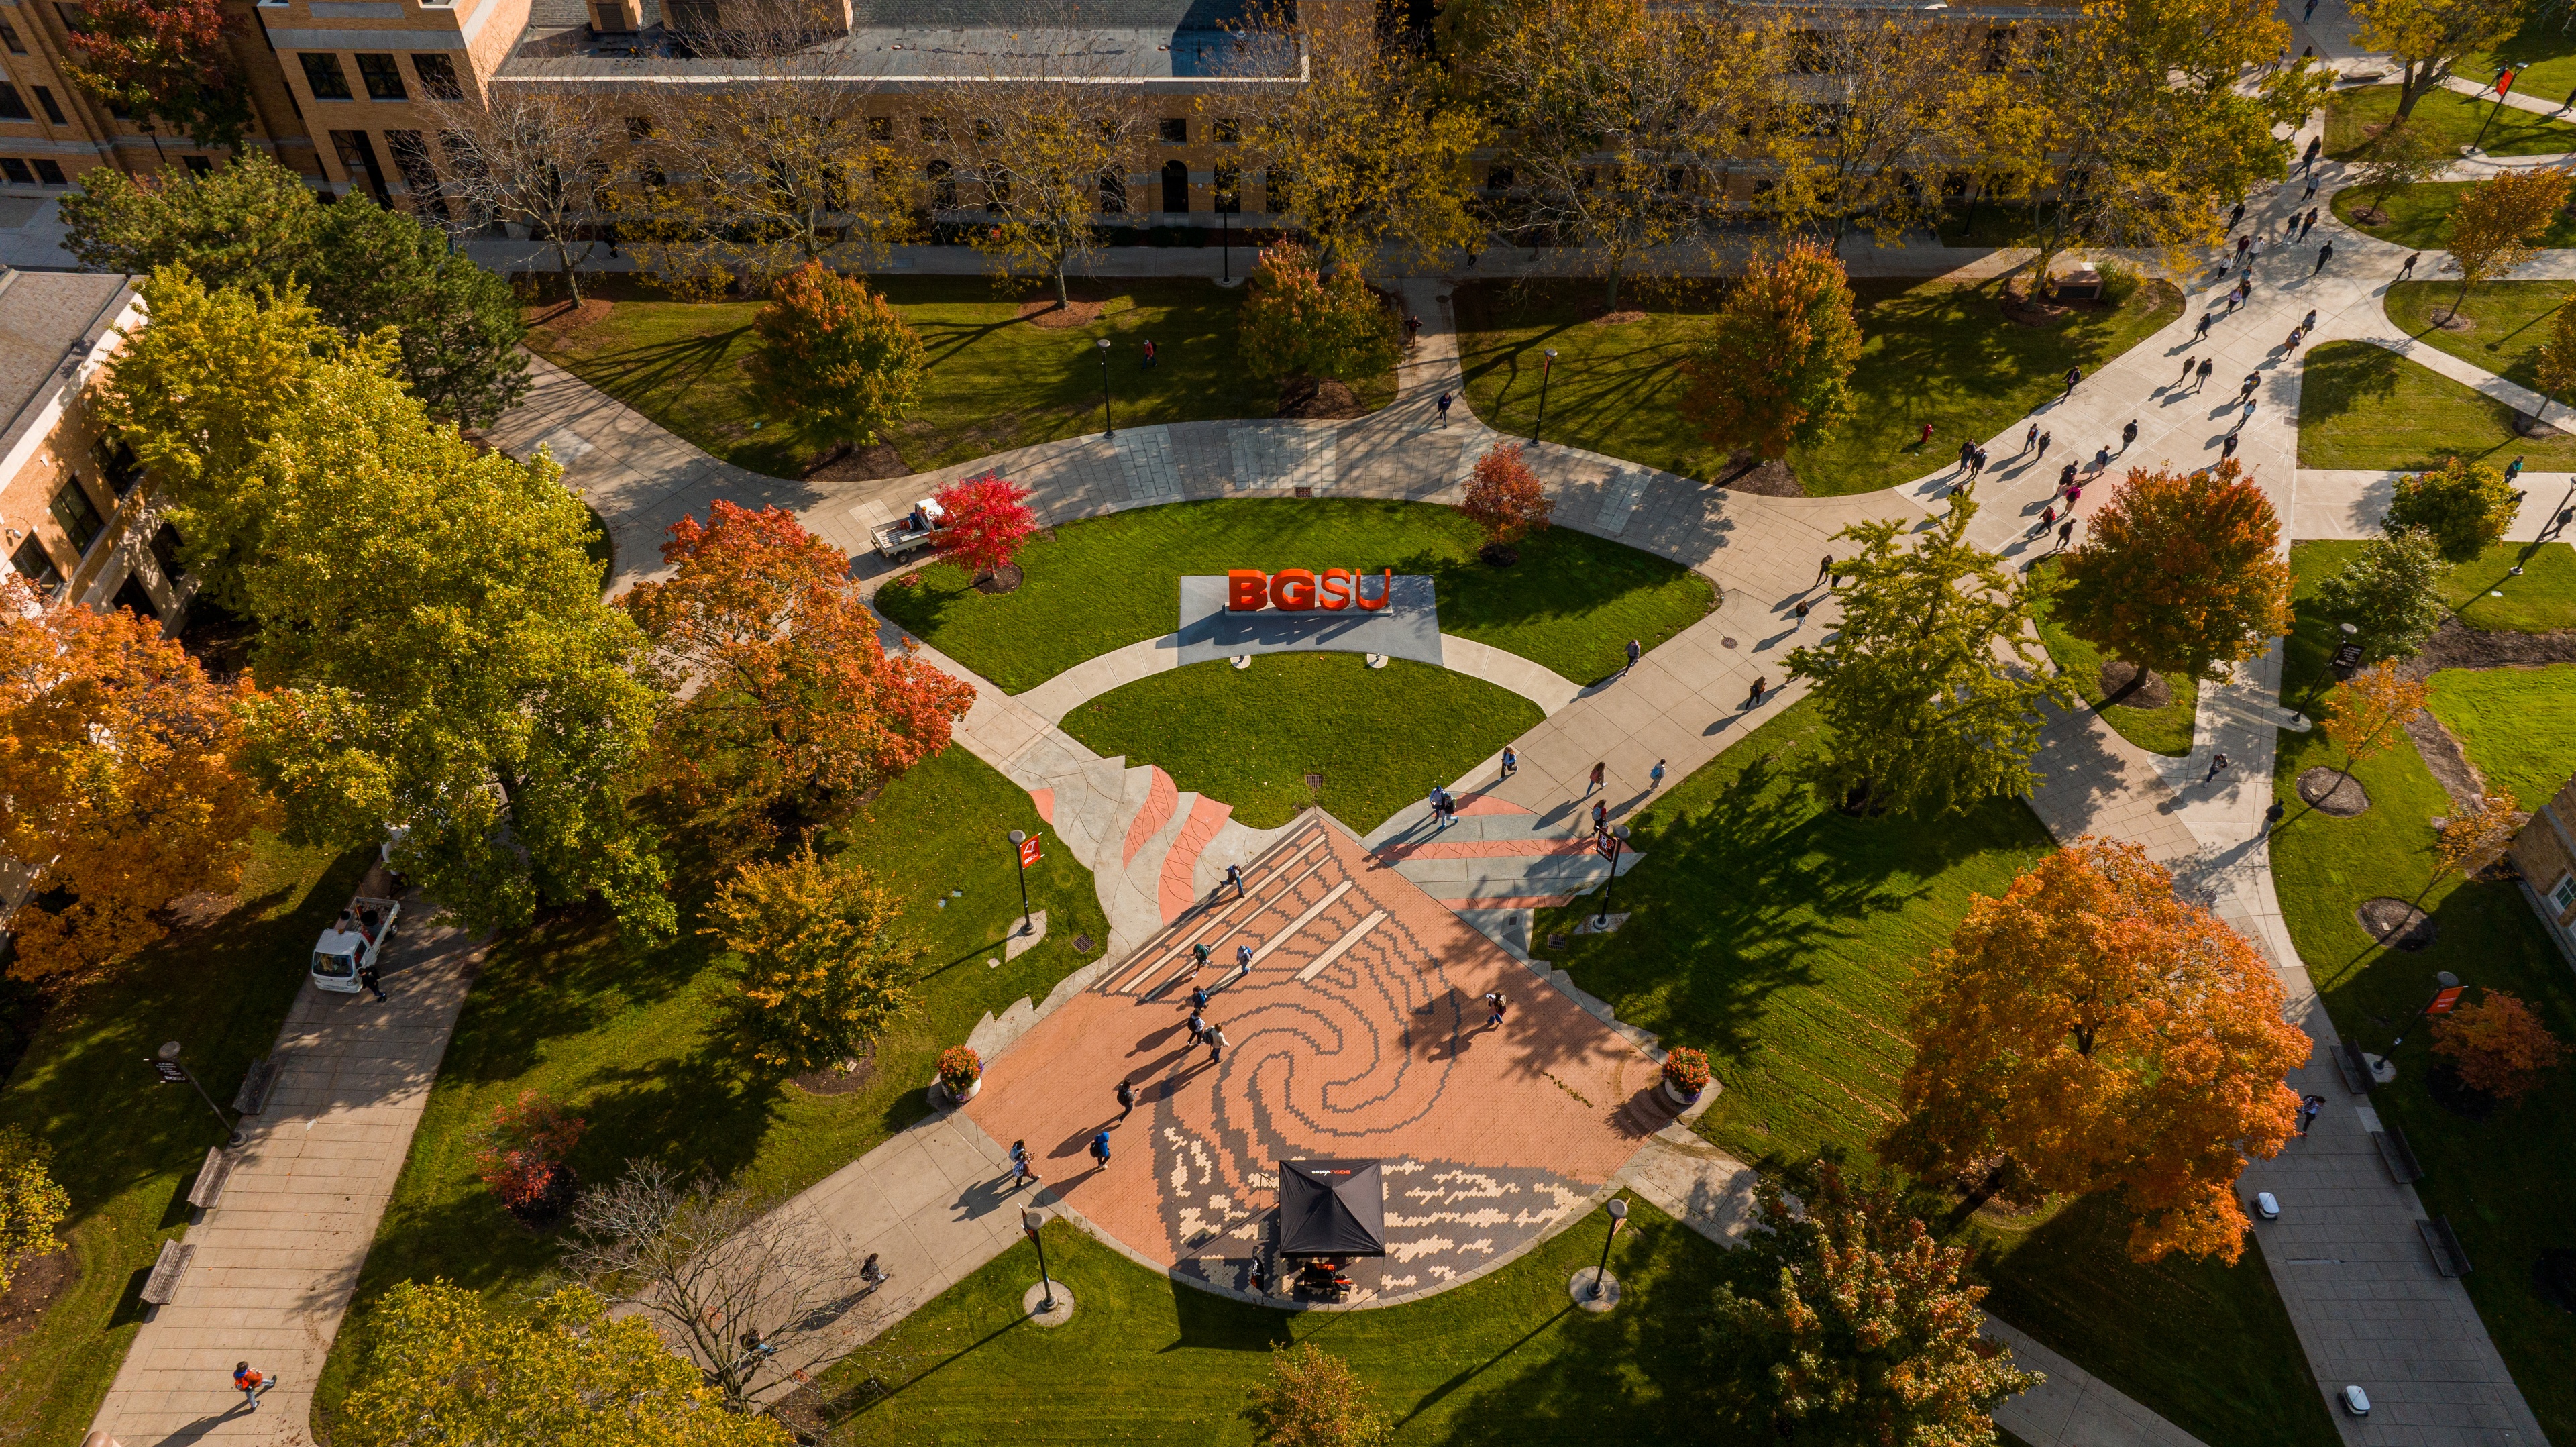 An aerial view of the BGSU letters and the oval during autumn